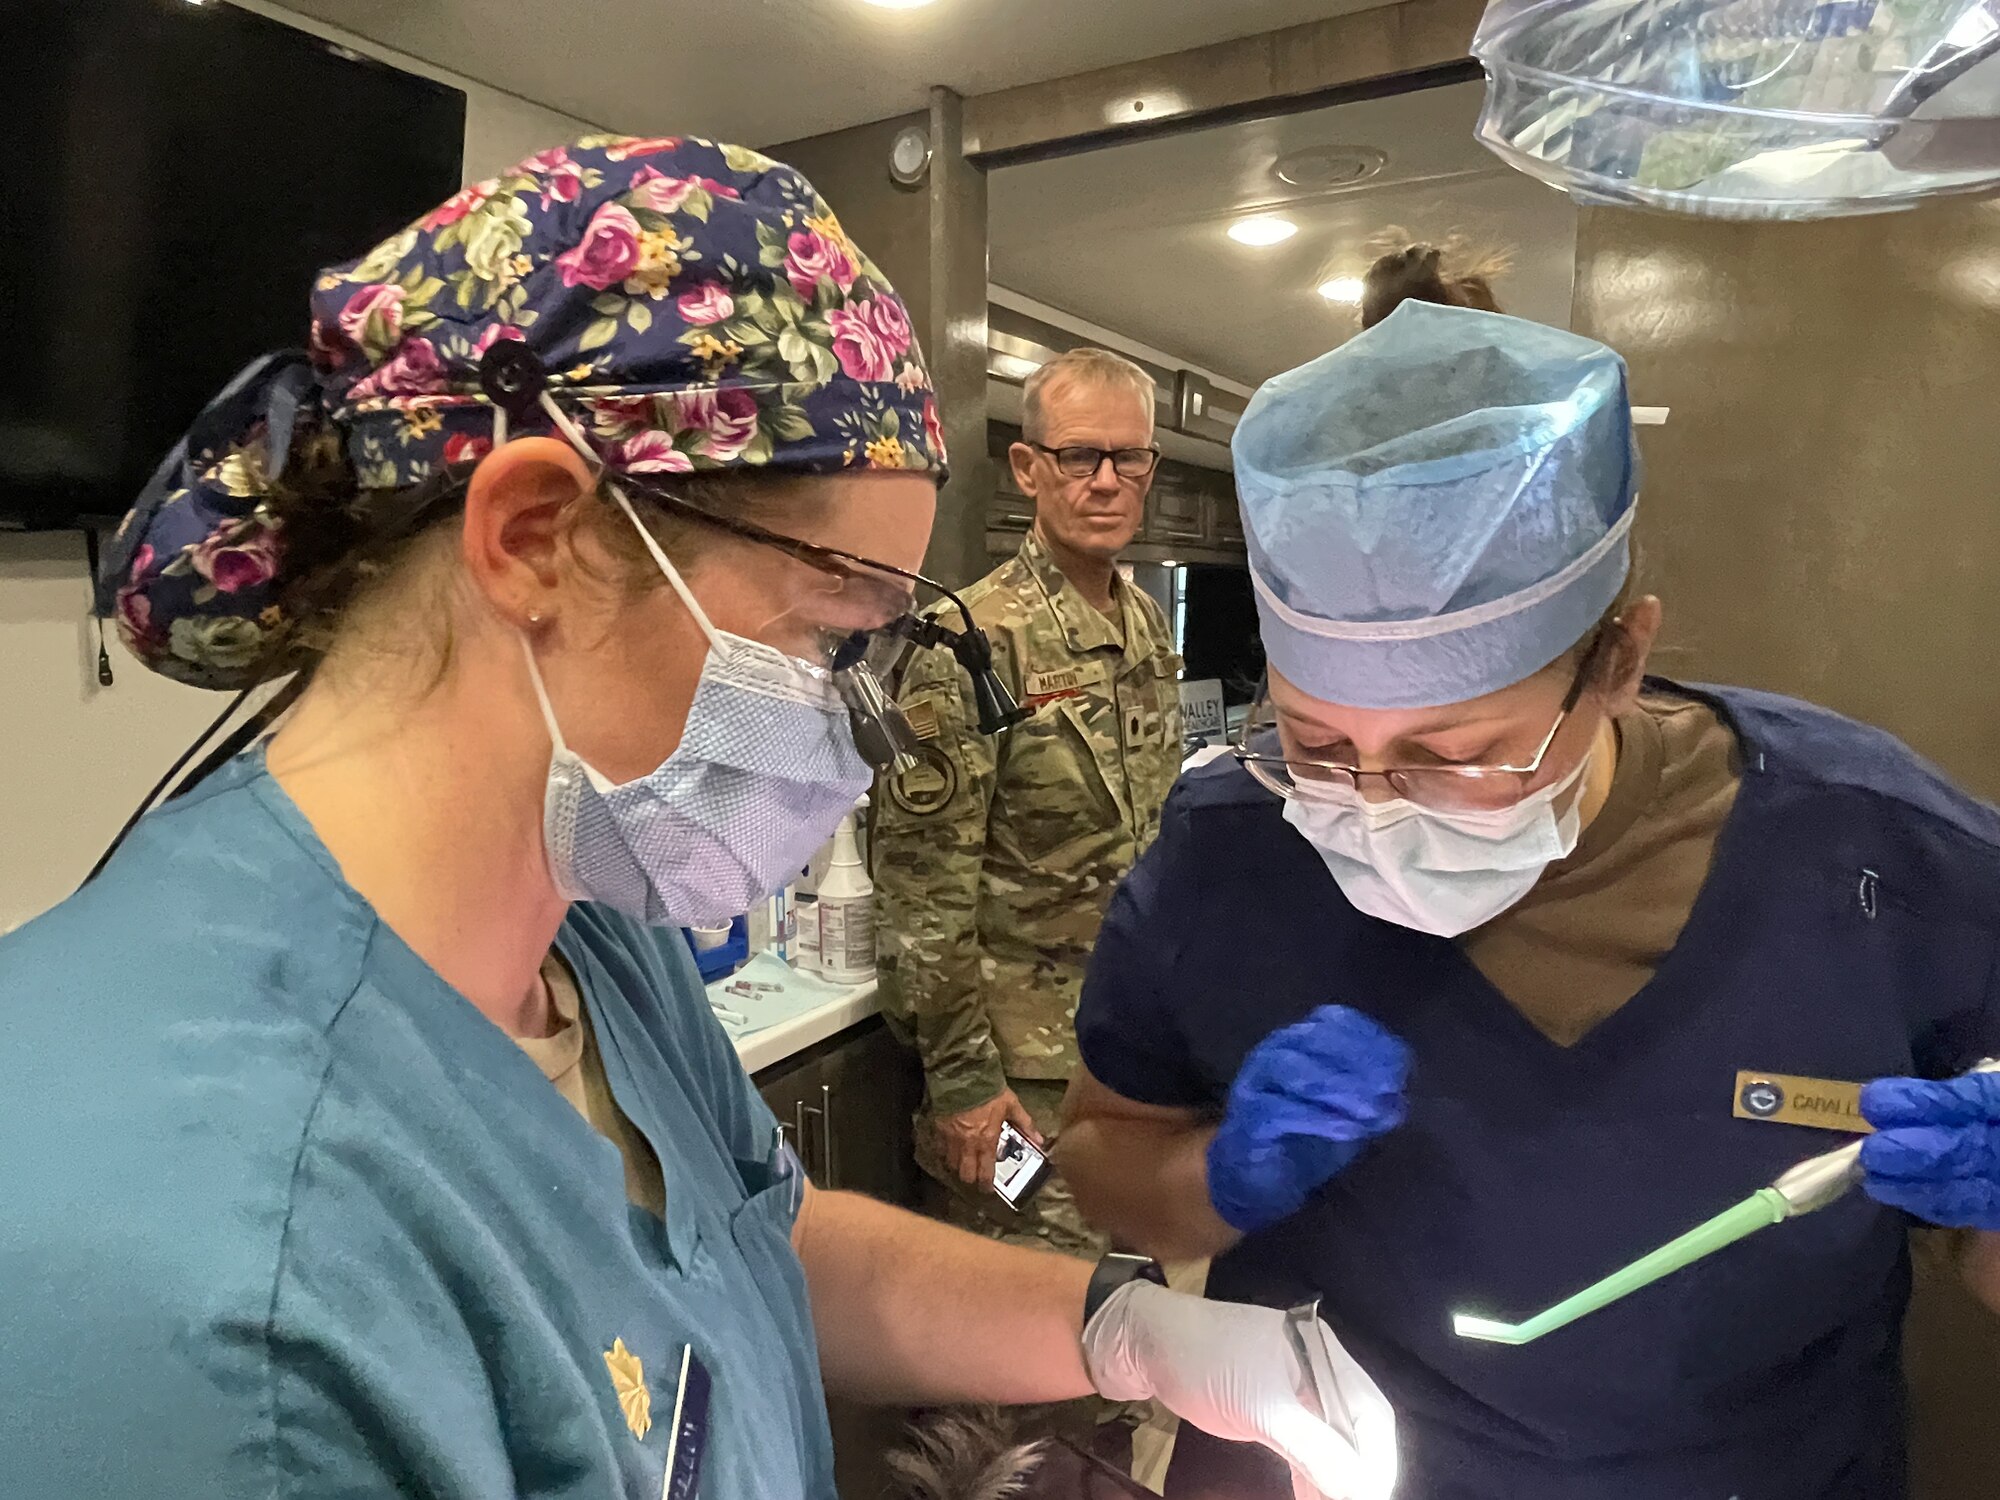 Airmen of the 102nd Medical Group, Otis ANGB, Mass., joined with Soldiers, Sailors and members of the U.S. Public Health Service to participate in Innovative Readiness Training in Georgia and Alabama in August 2022. The annual event connects the need for required, real-world training with resources provided by the civilian community to bring care to residents in need.